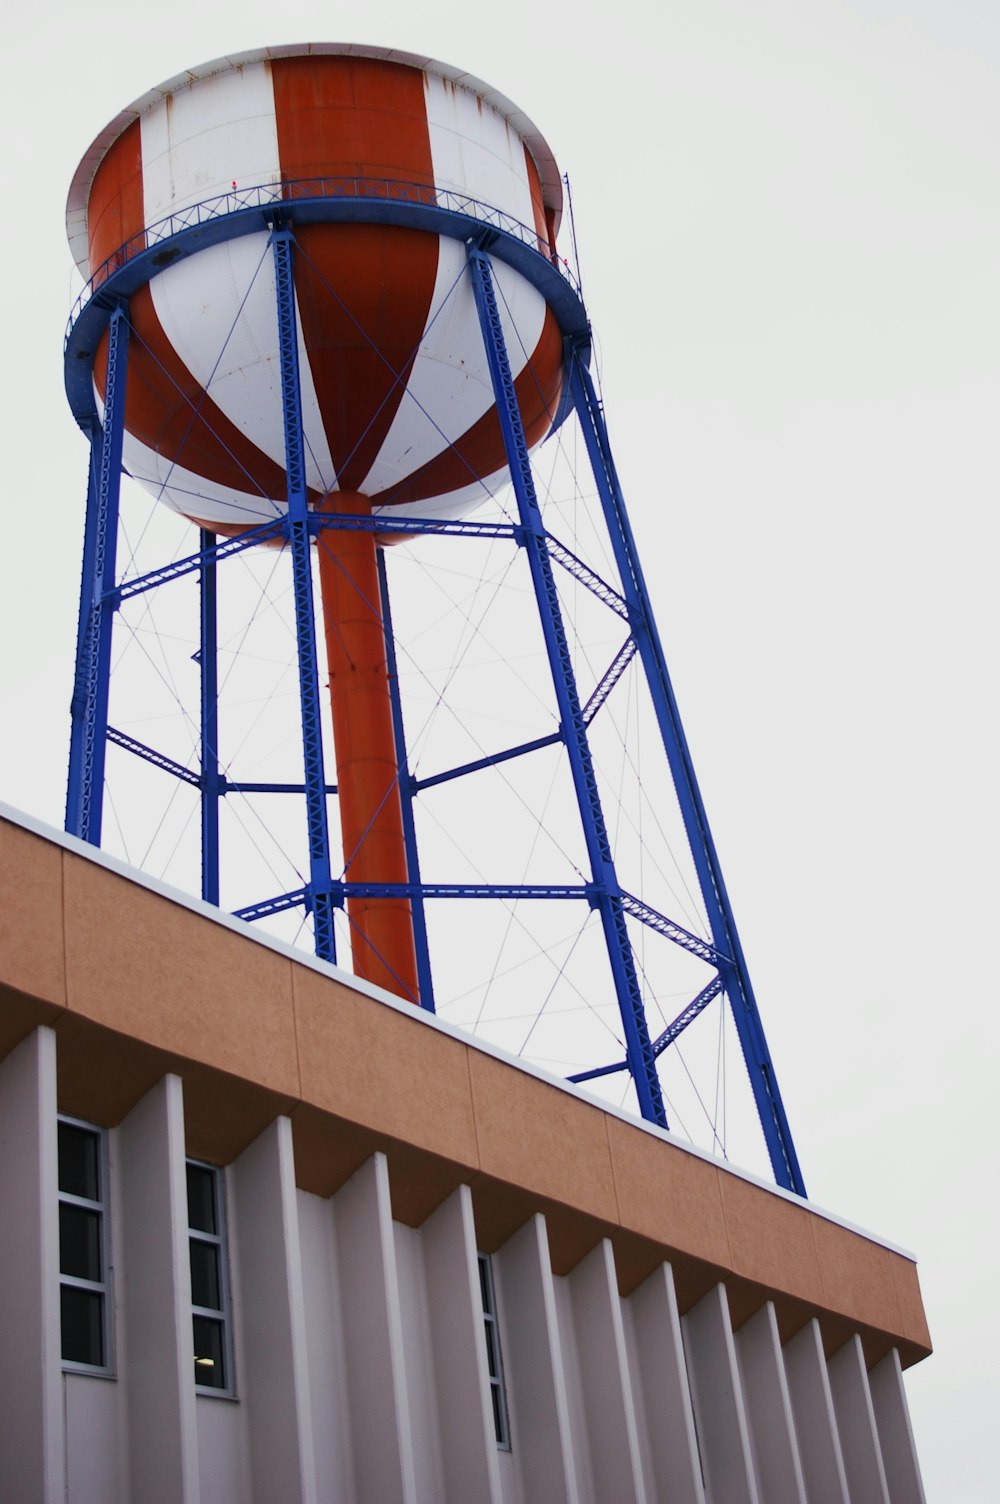 a tall water tower with a red and white striped top